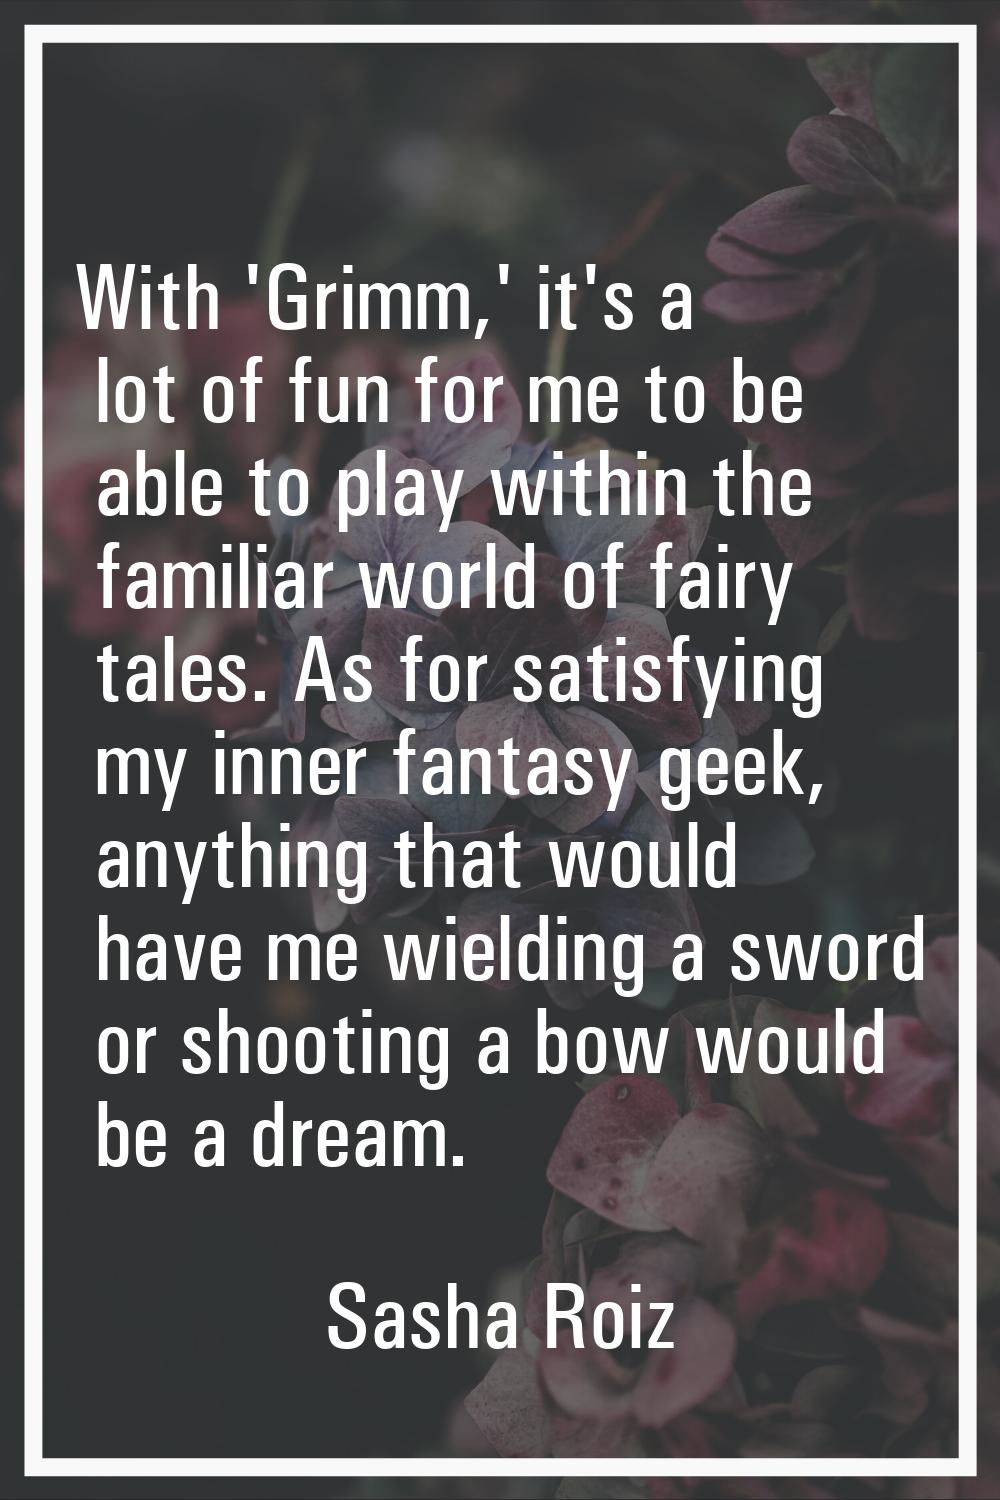 With 'Grimm,' it's a lot of fun for me to be able to play within the familiar world of fairy tales.